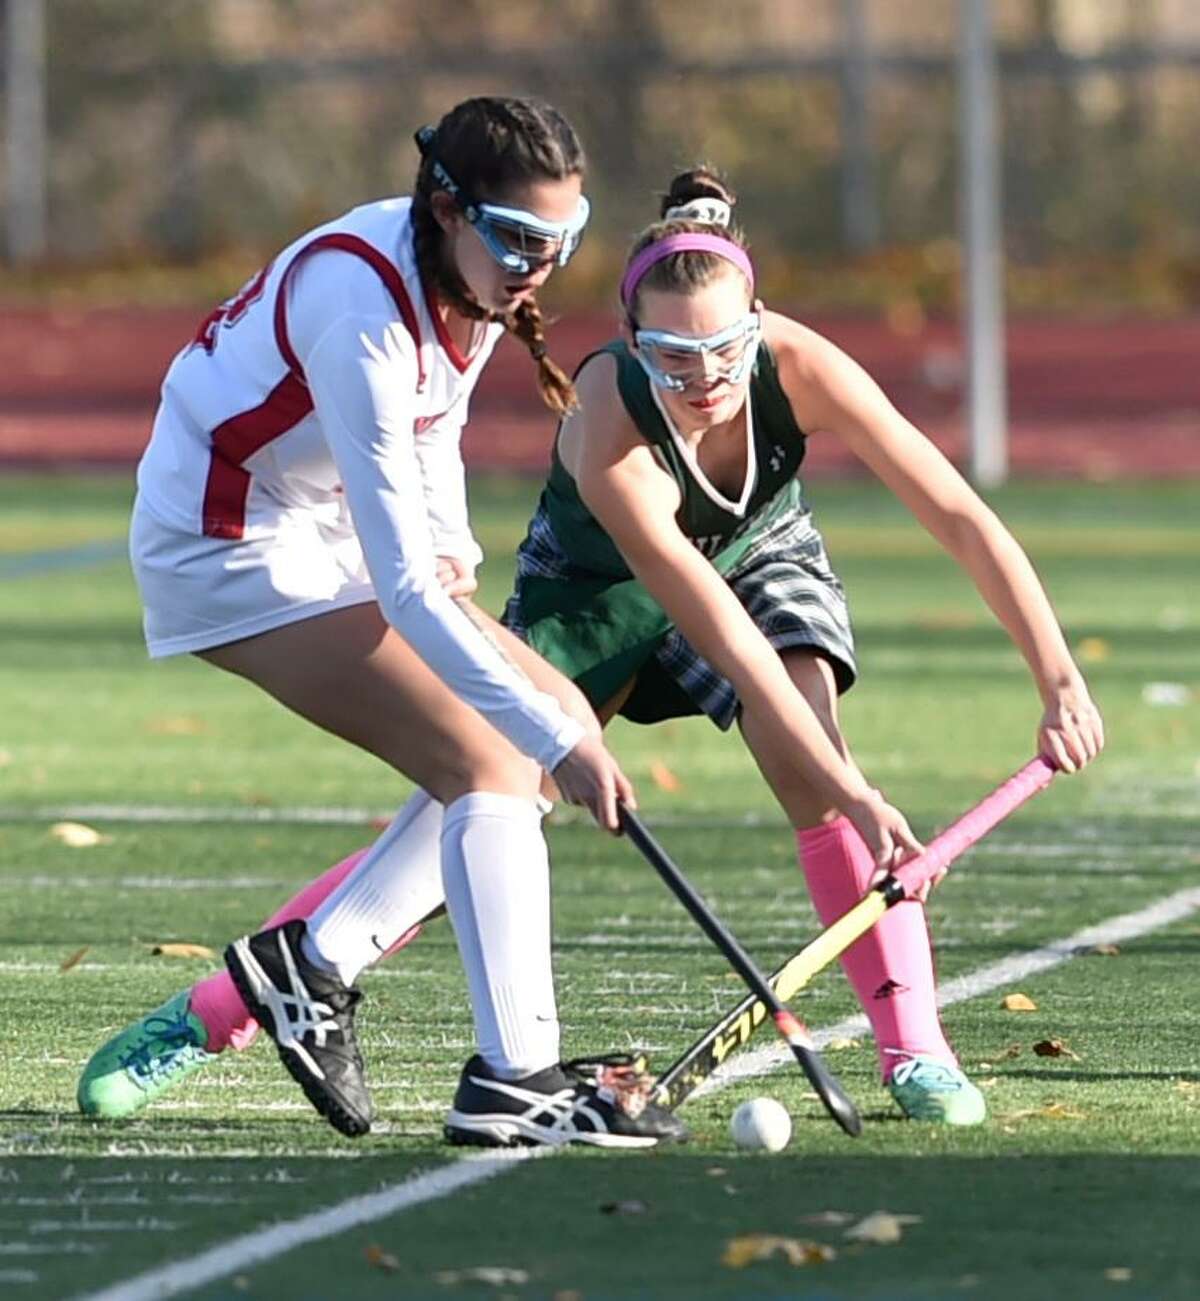 Guilford, Connecticut - Saturday, November 3, 2018: #1 Cheshire H.S. vs. #2 Guilford during first half action of the SCC Field Hockey Championship Final Saturday at Guilford H.S.